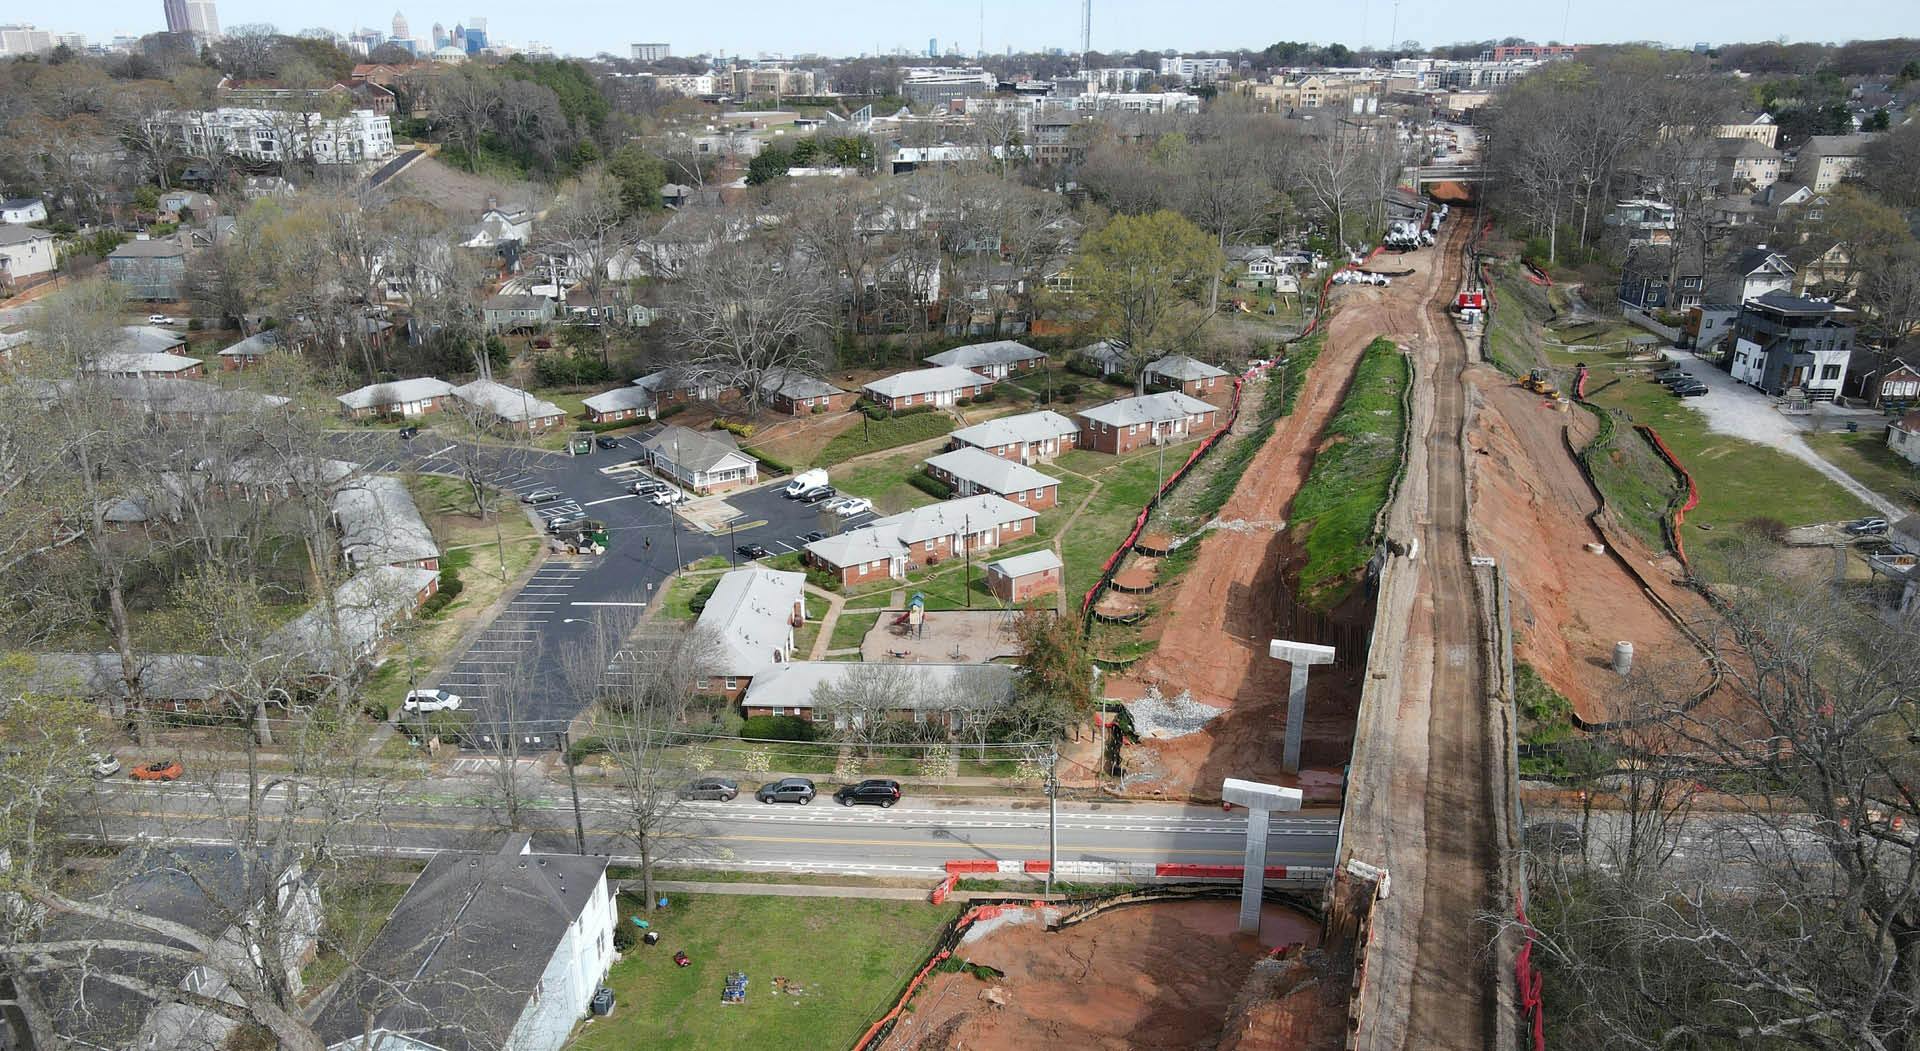 Southside Trail - Segment 5 construction on the new pedestrian bridge over Ormewood Avenue. Photo by LoKnows Drones.